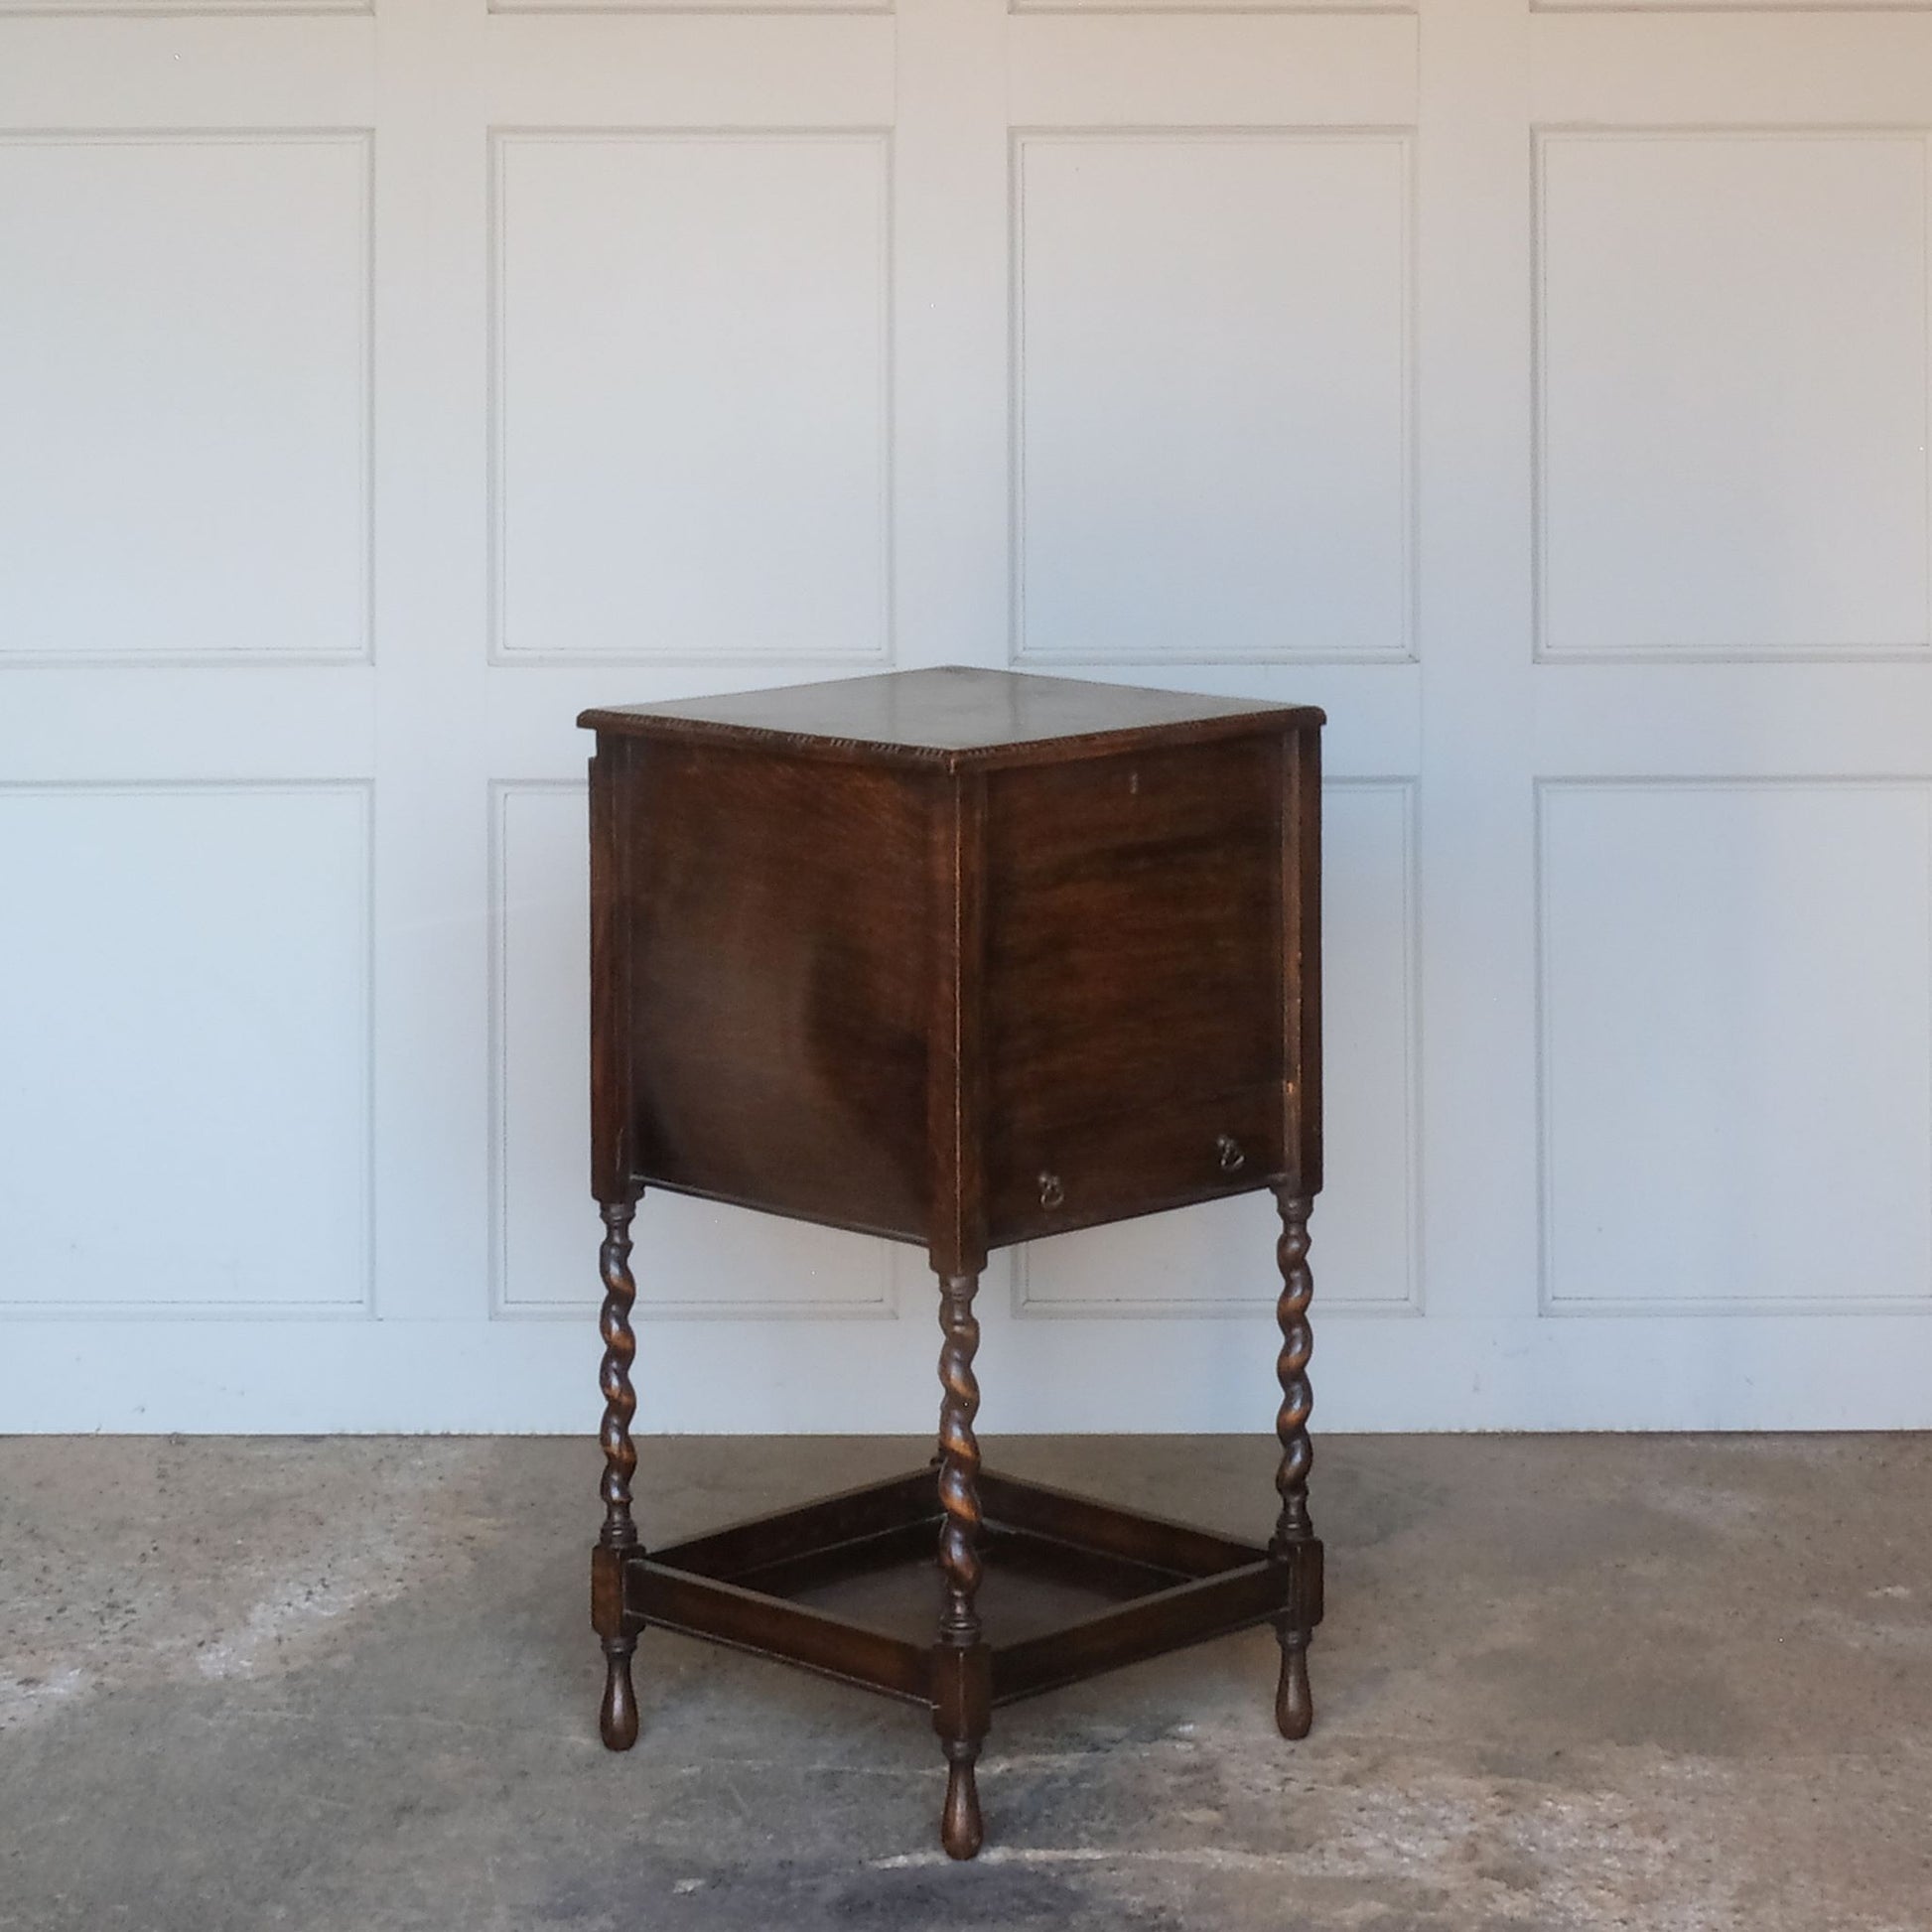 A late 19th / early 20th century oak sewing table, with a hinged top and single drawer below, on elegant barley twist supports over a single shelf and turned feet, the interior of the upper cabinet and drawer lined with burnt orange silk padding, with some age related patina, in very good condition. It would make a lovely bedside table.